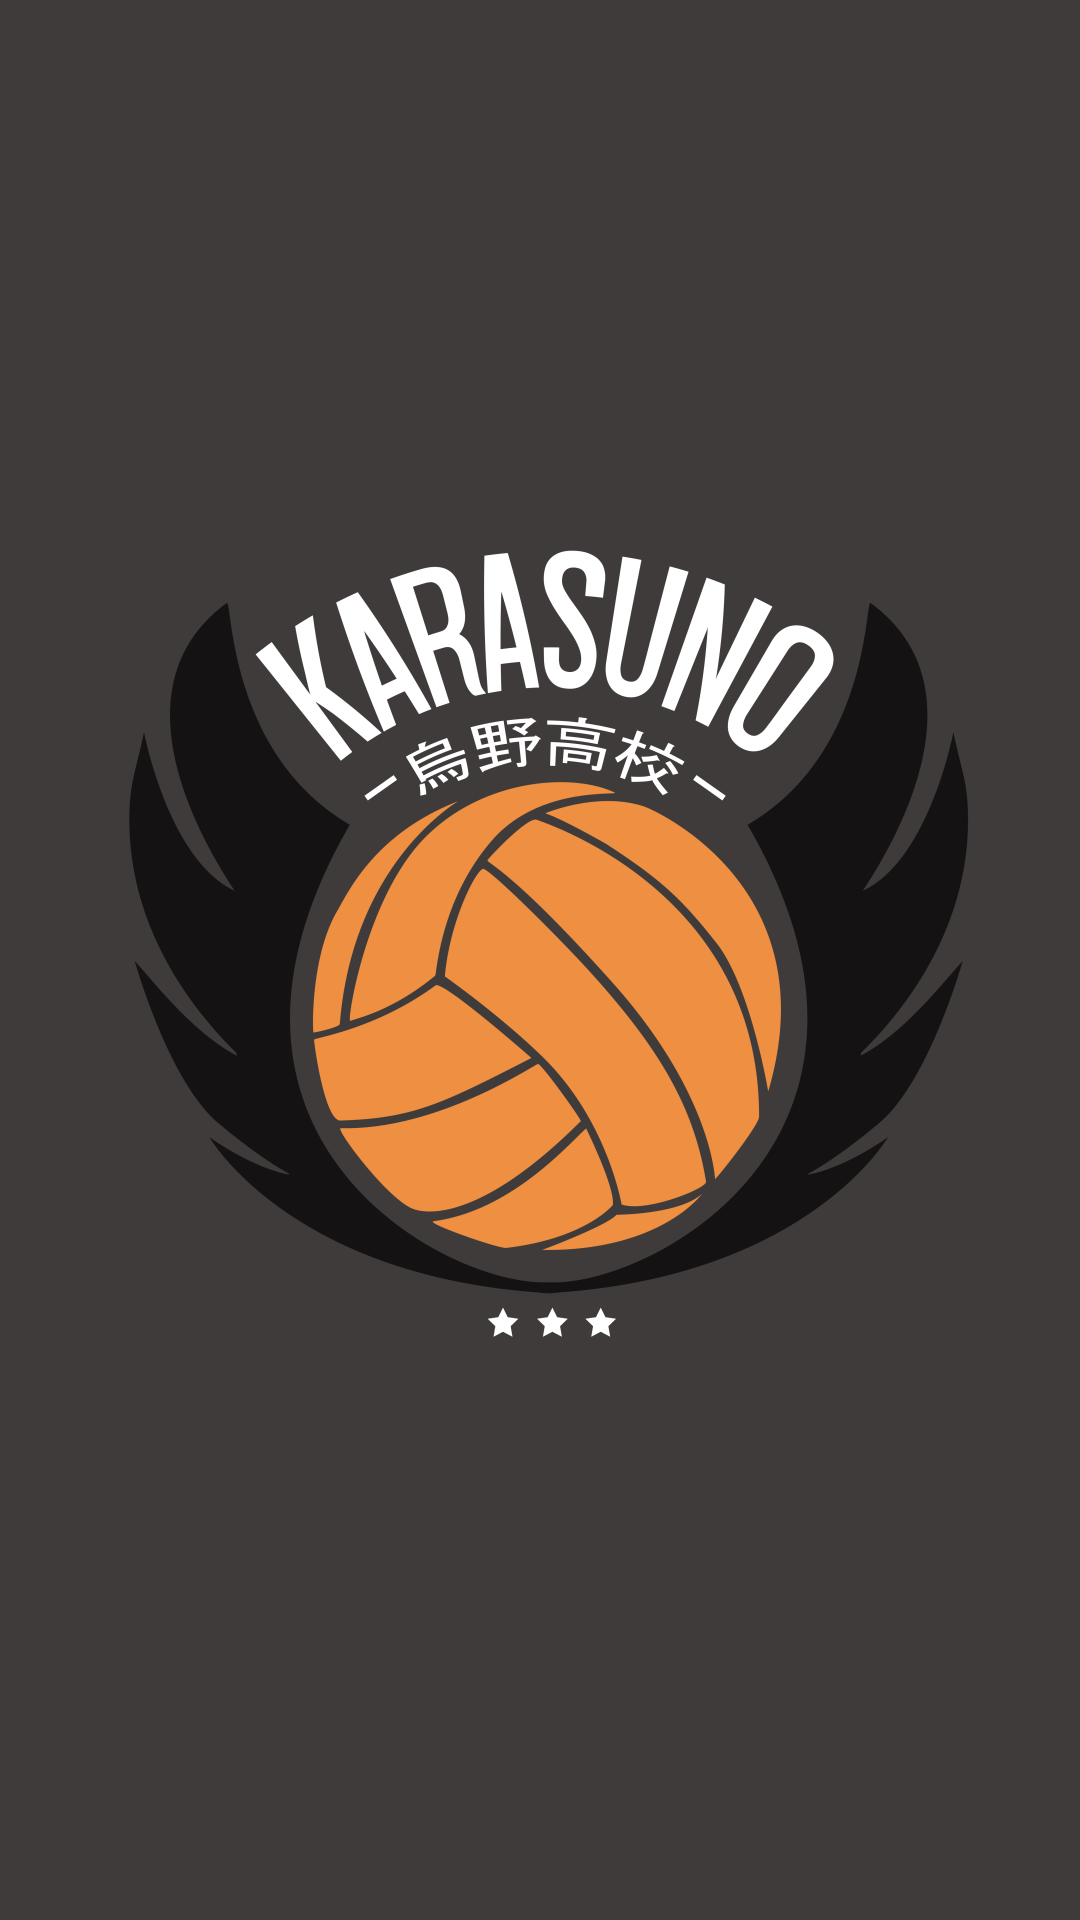 Karasuno Wallpaper For Your Phone This Is Also Available - Haikyuu Iphone Wallpaper Hd , HD Wallpaper & Backgrounds